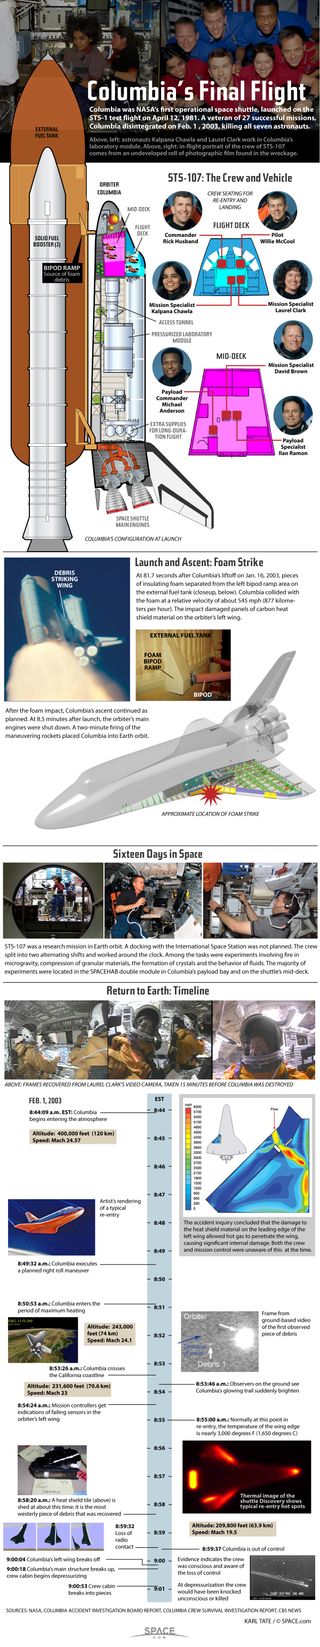 See how the Columbia shuttle accident occurred in this SPACE.com infographic.